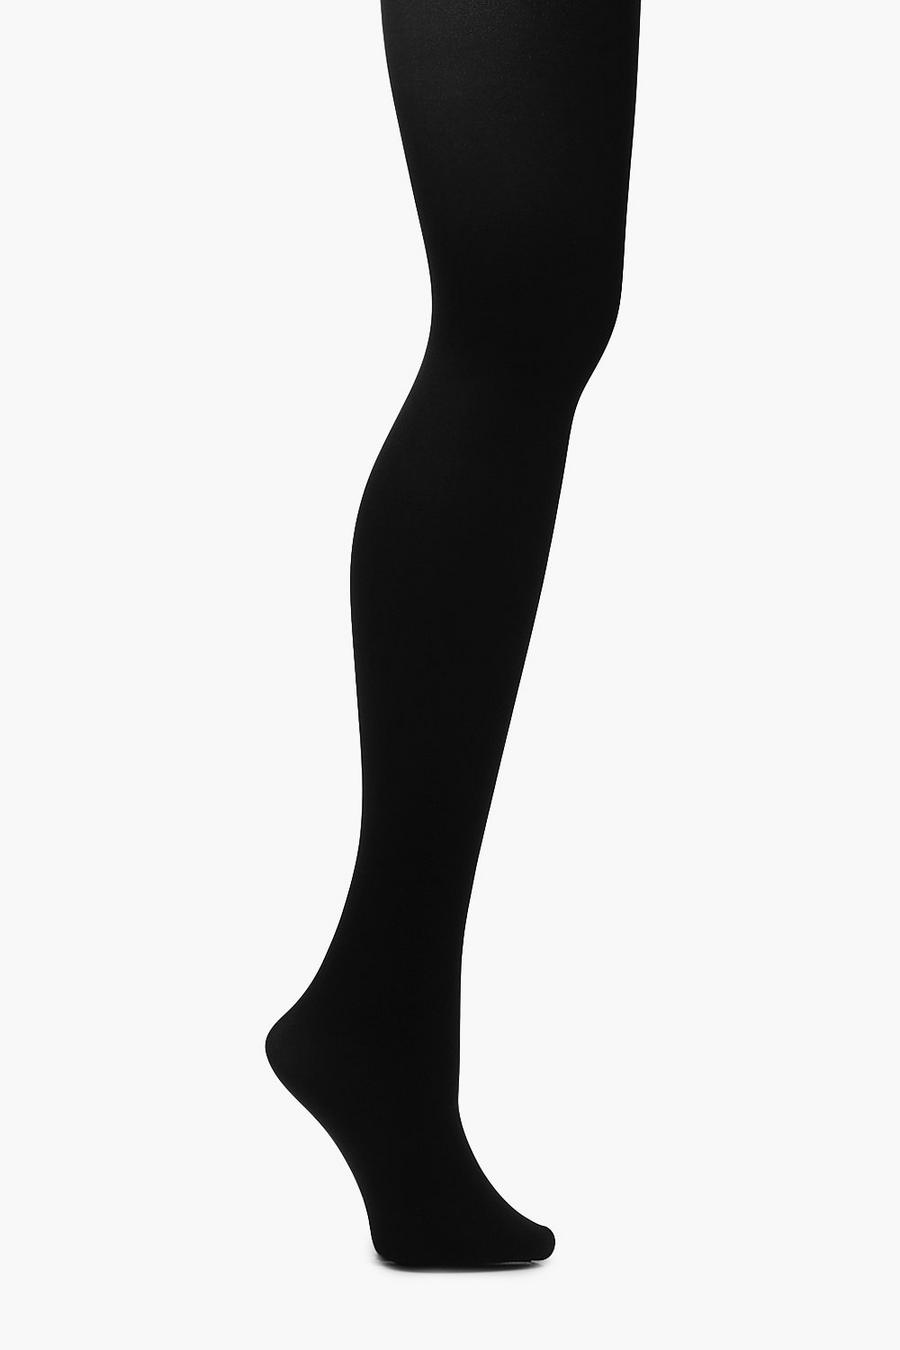 MAWCLOS Ladies Stretch Footed Leggings Workout Opaque Stockings Black-Feet  350g Plus Size 